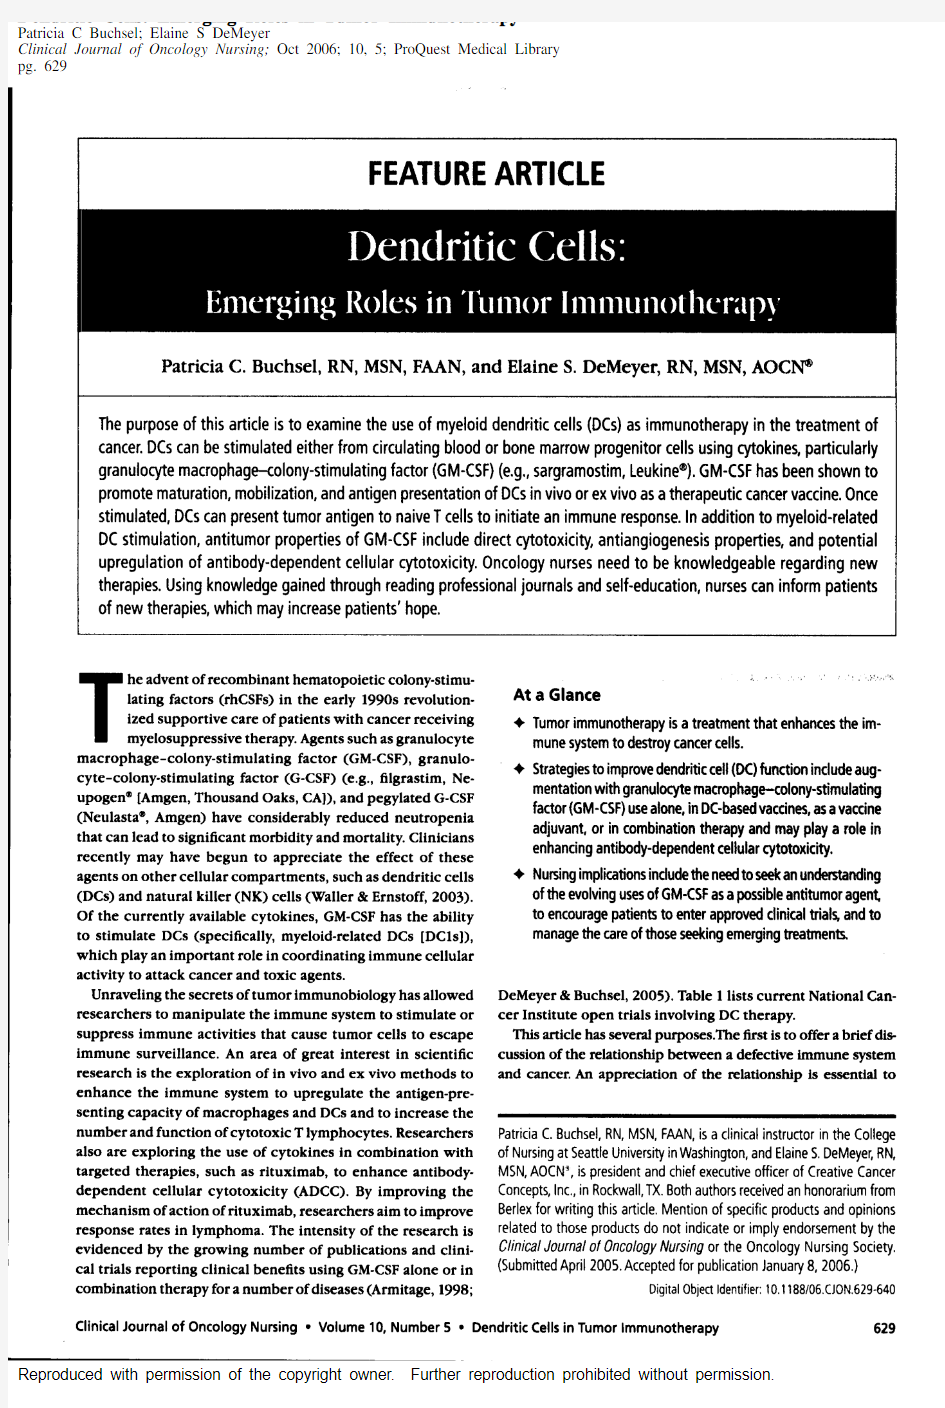 dentritic cells-emerging roles in tumor immunotherapy